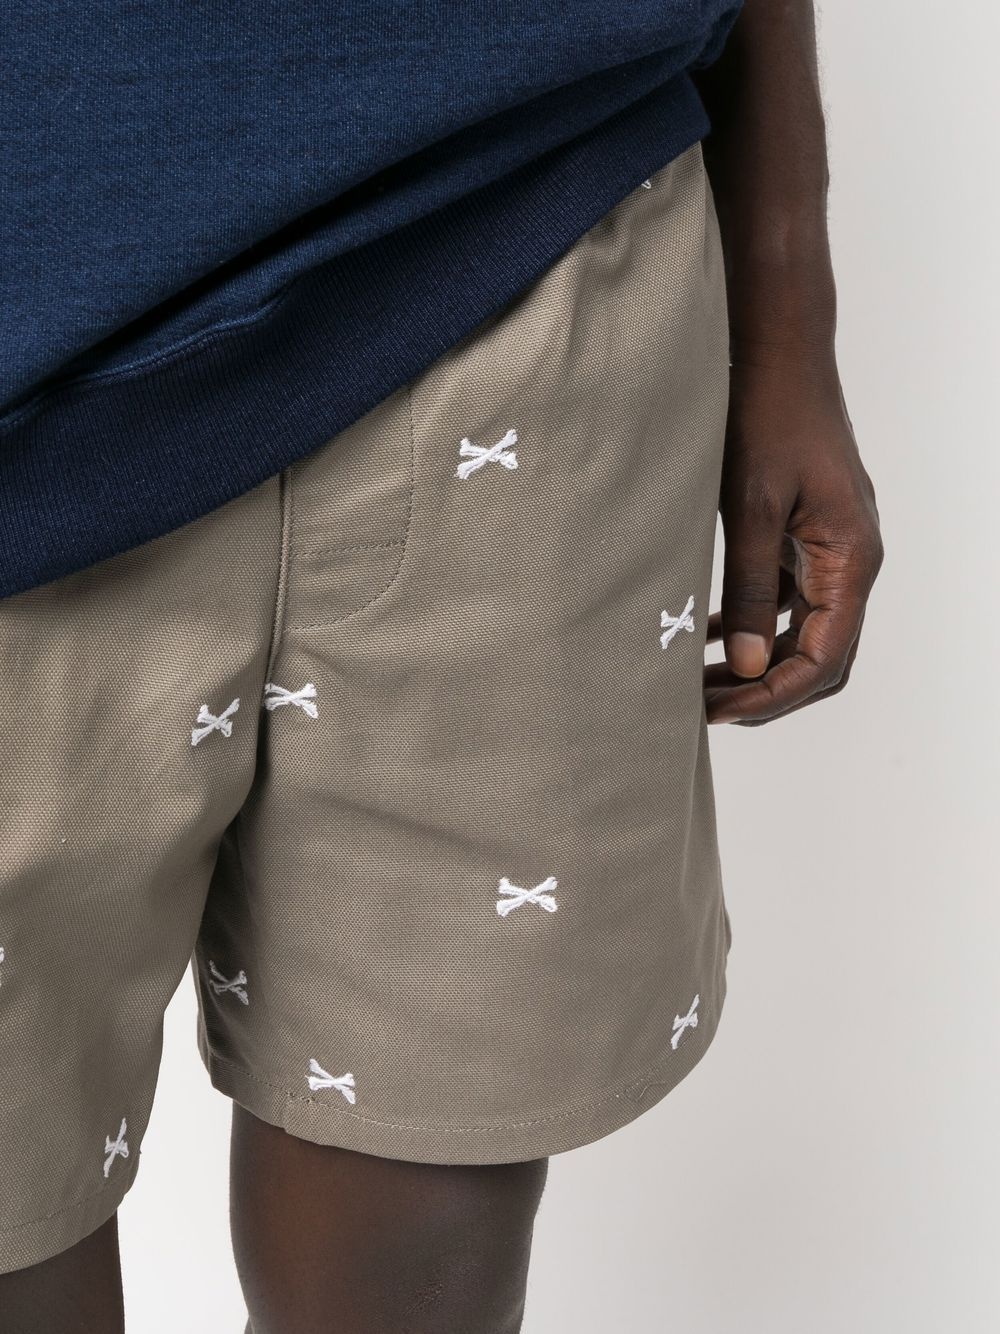 Seagull 01 embroidered track shorts - 5